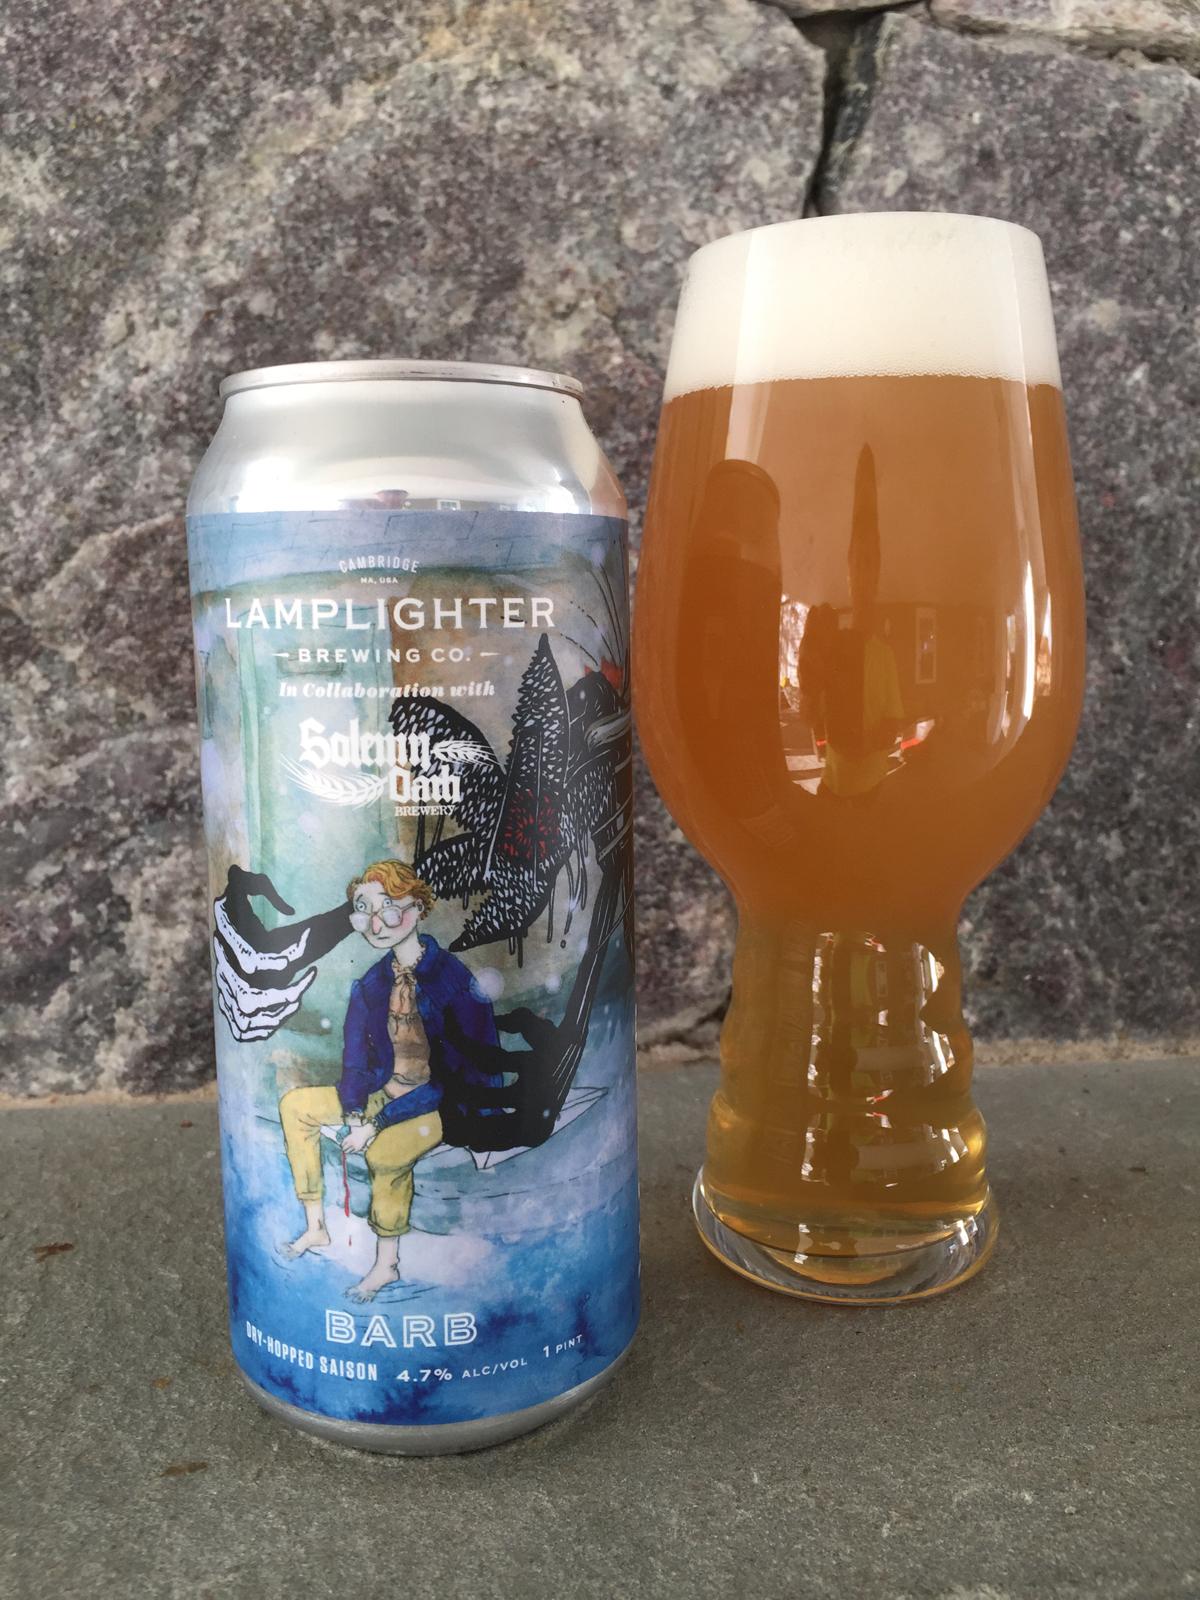 Barb (Collaboration with Solemn Oath)